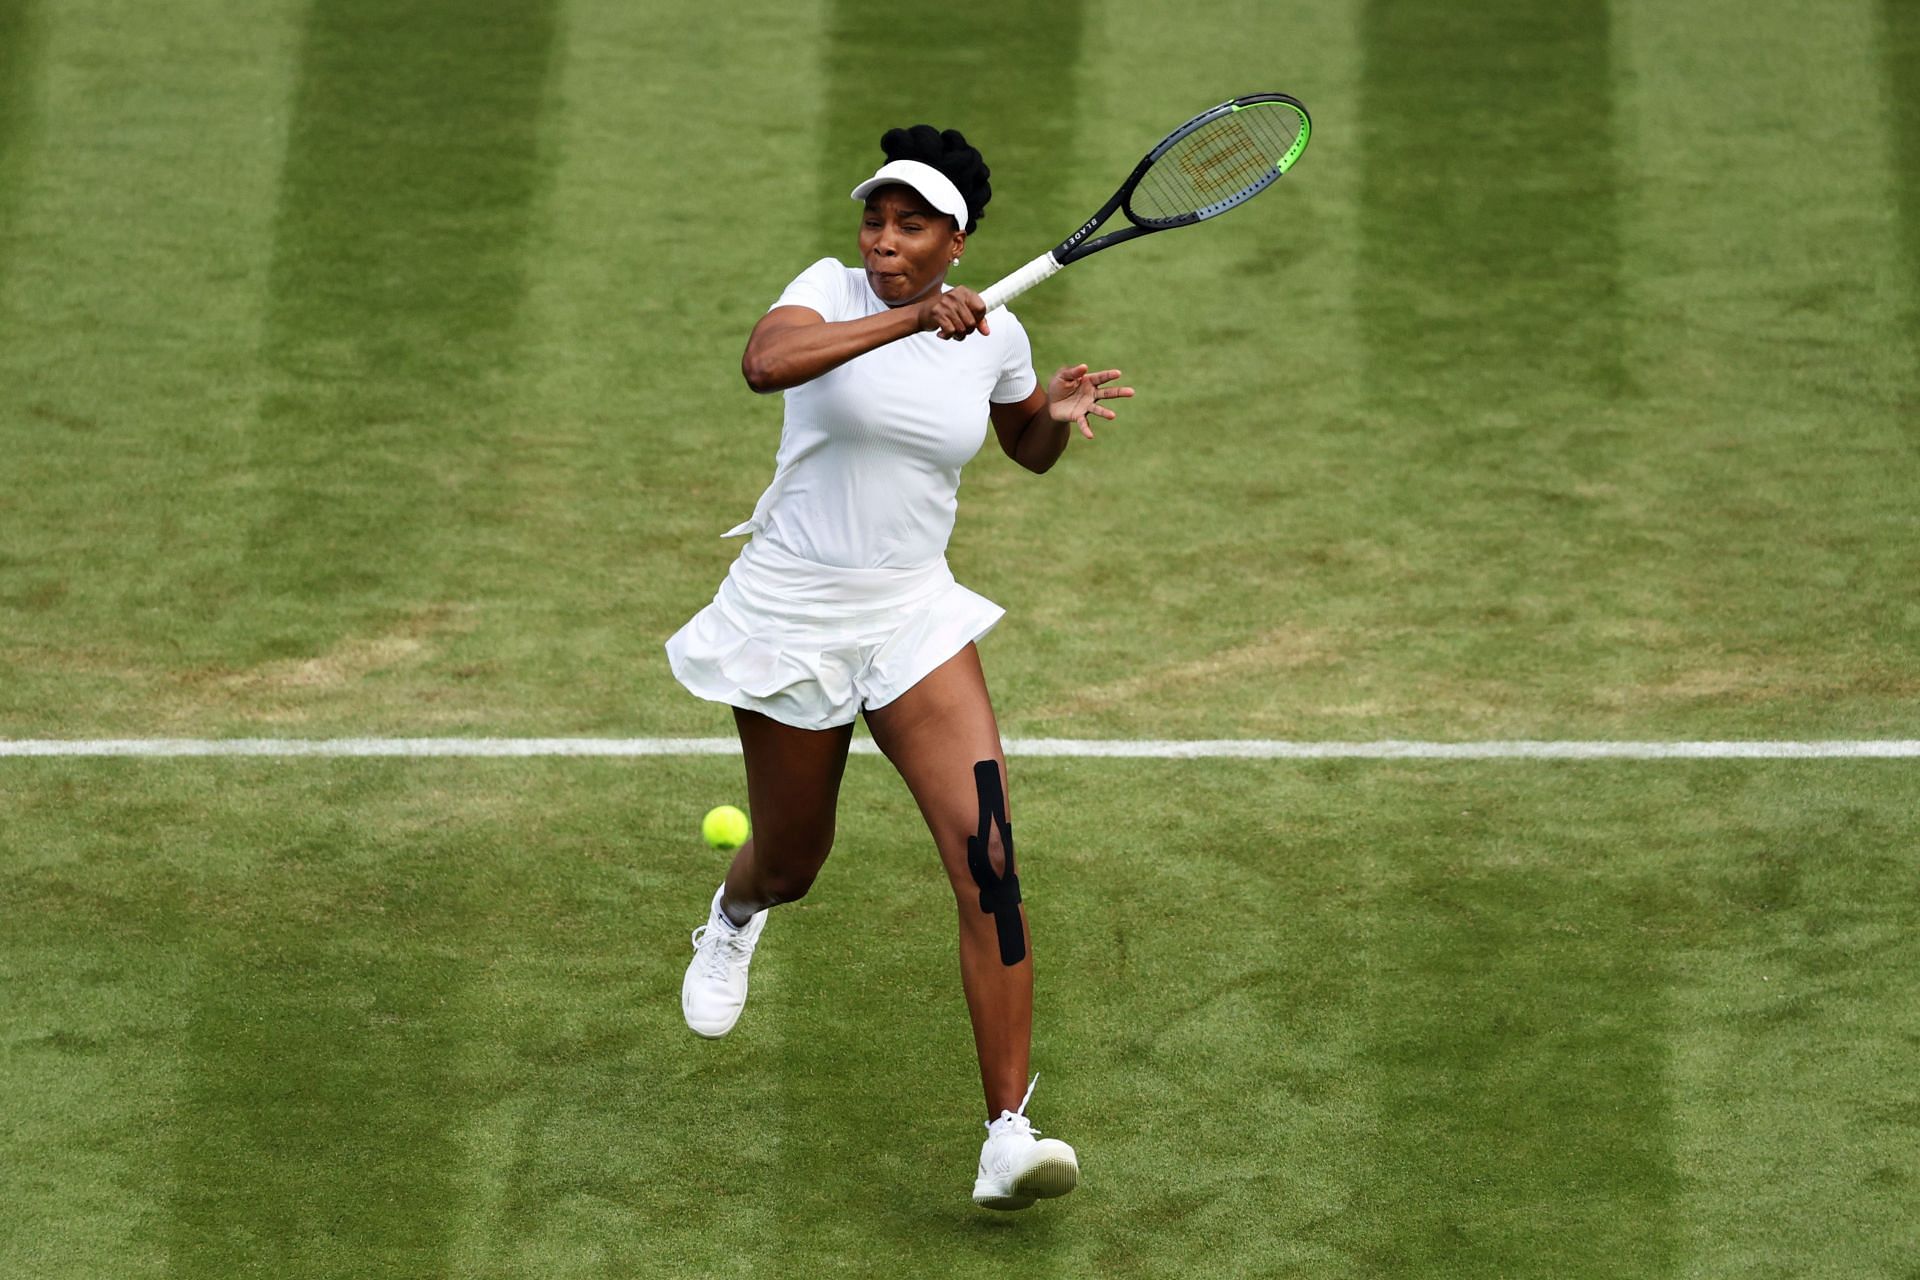 Venus Williams is yet to play a match since last August